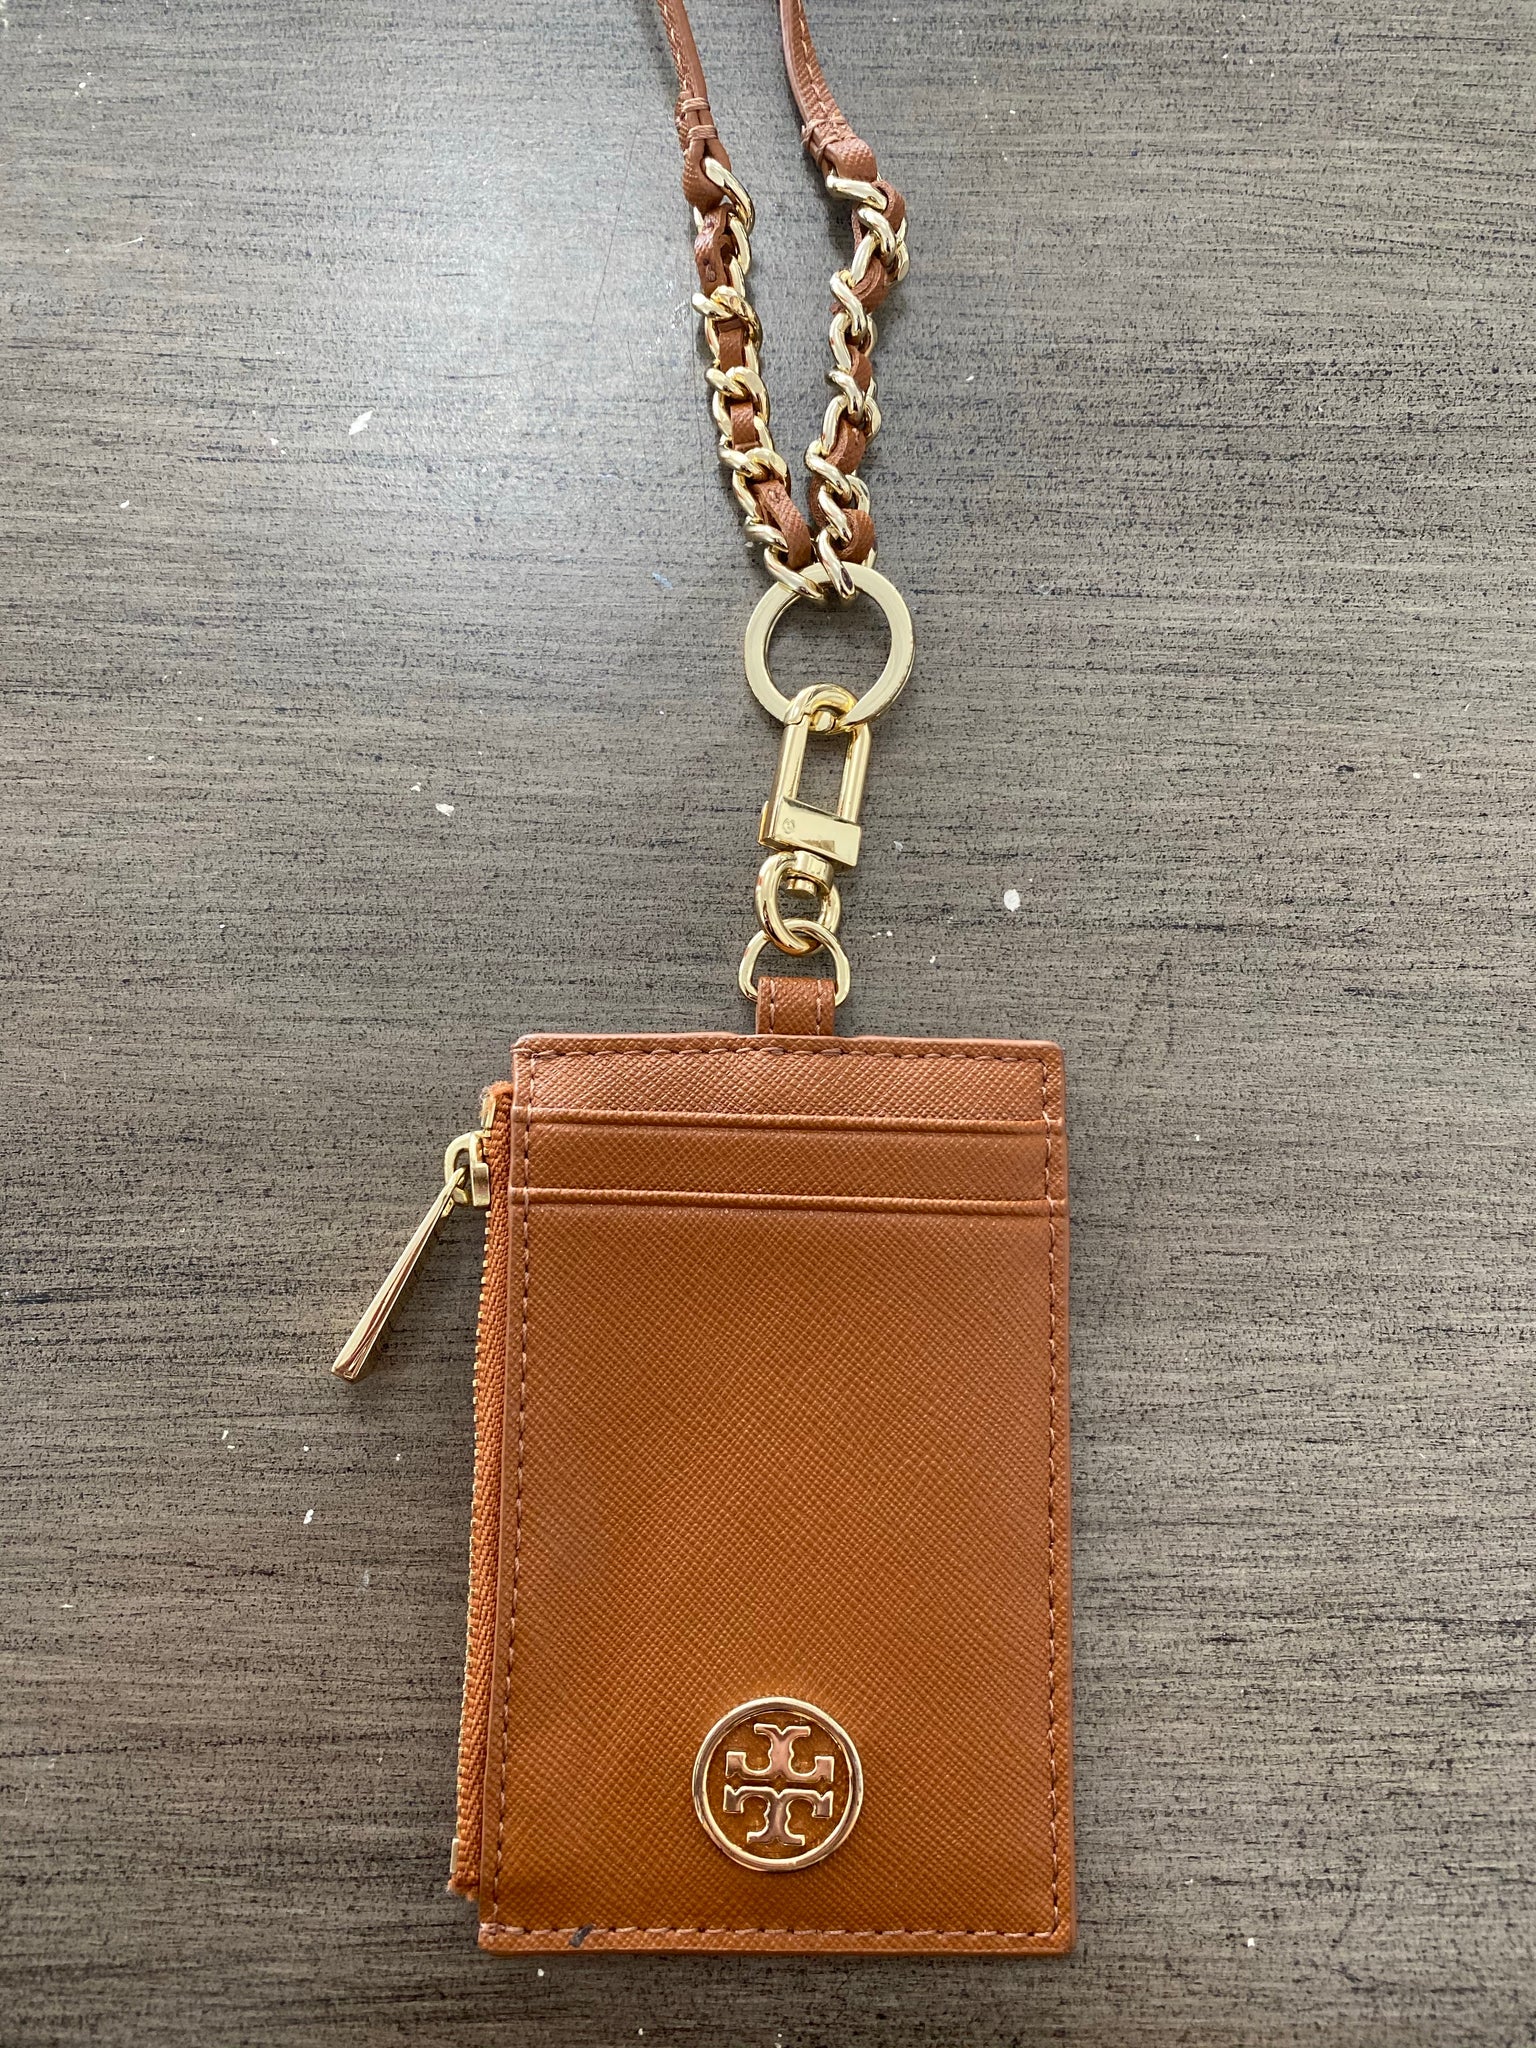 Tory Burch Card Holder with Lanyard – Midtown Authentic Wyckoff